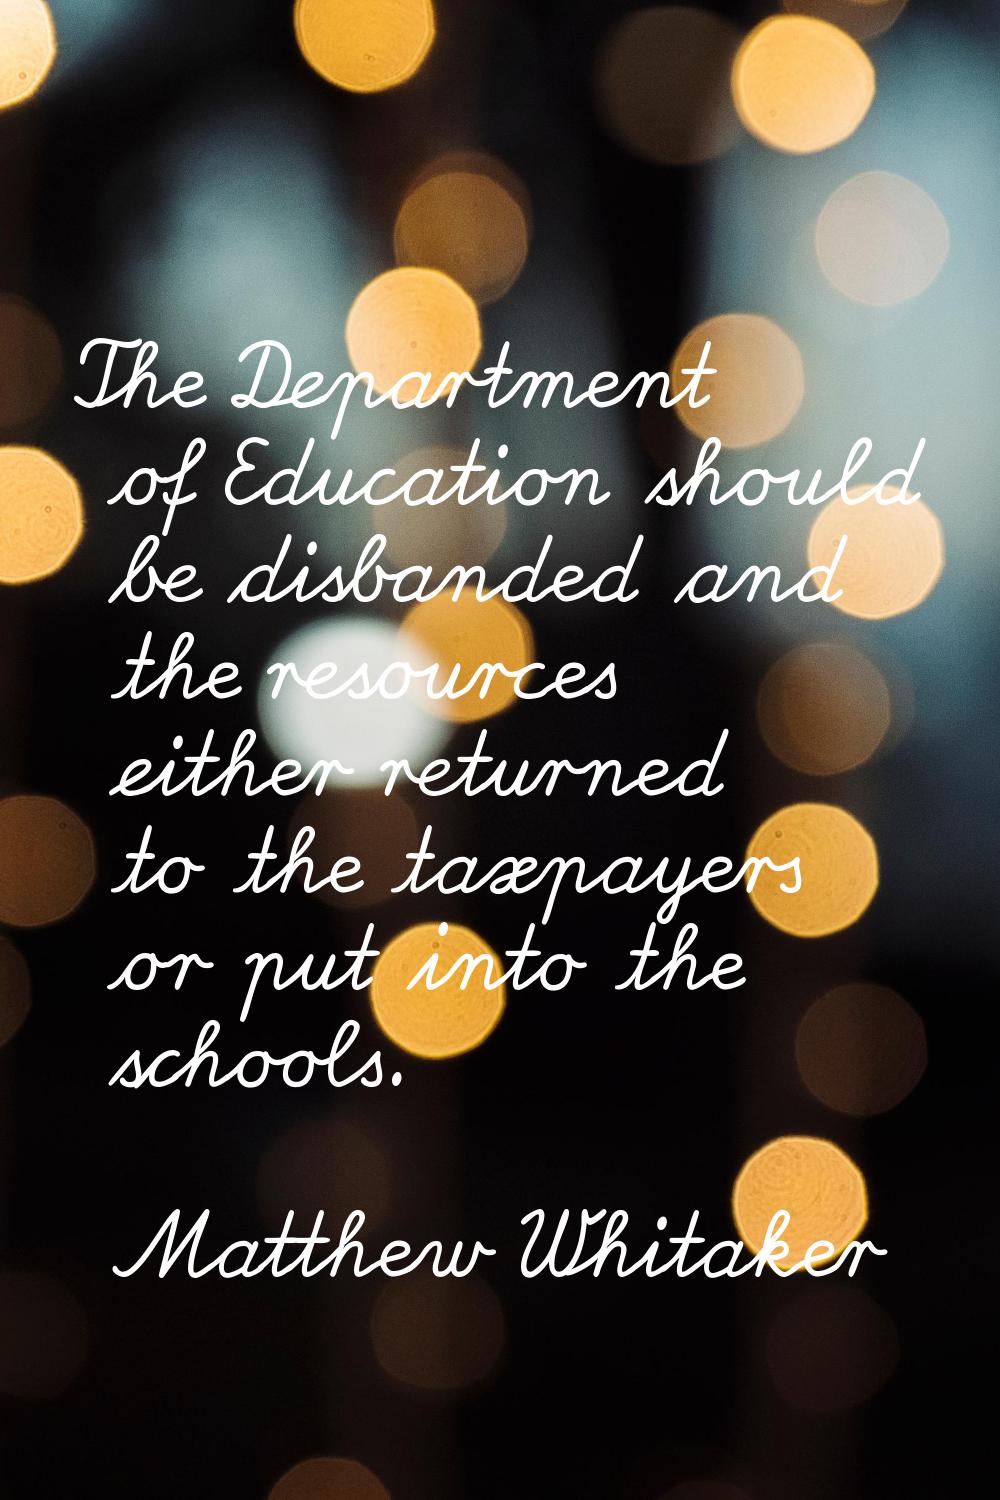 The Department of Education should be disbanded and the resources either returned to the taxpayers 